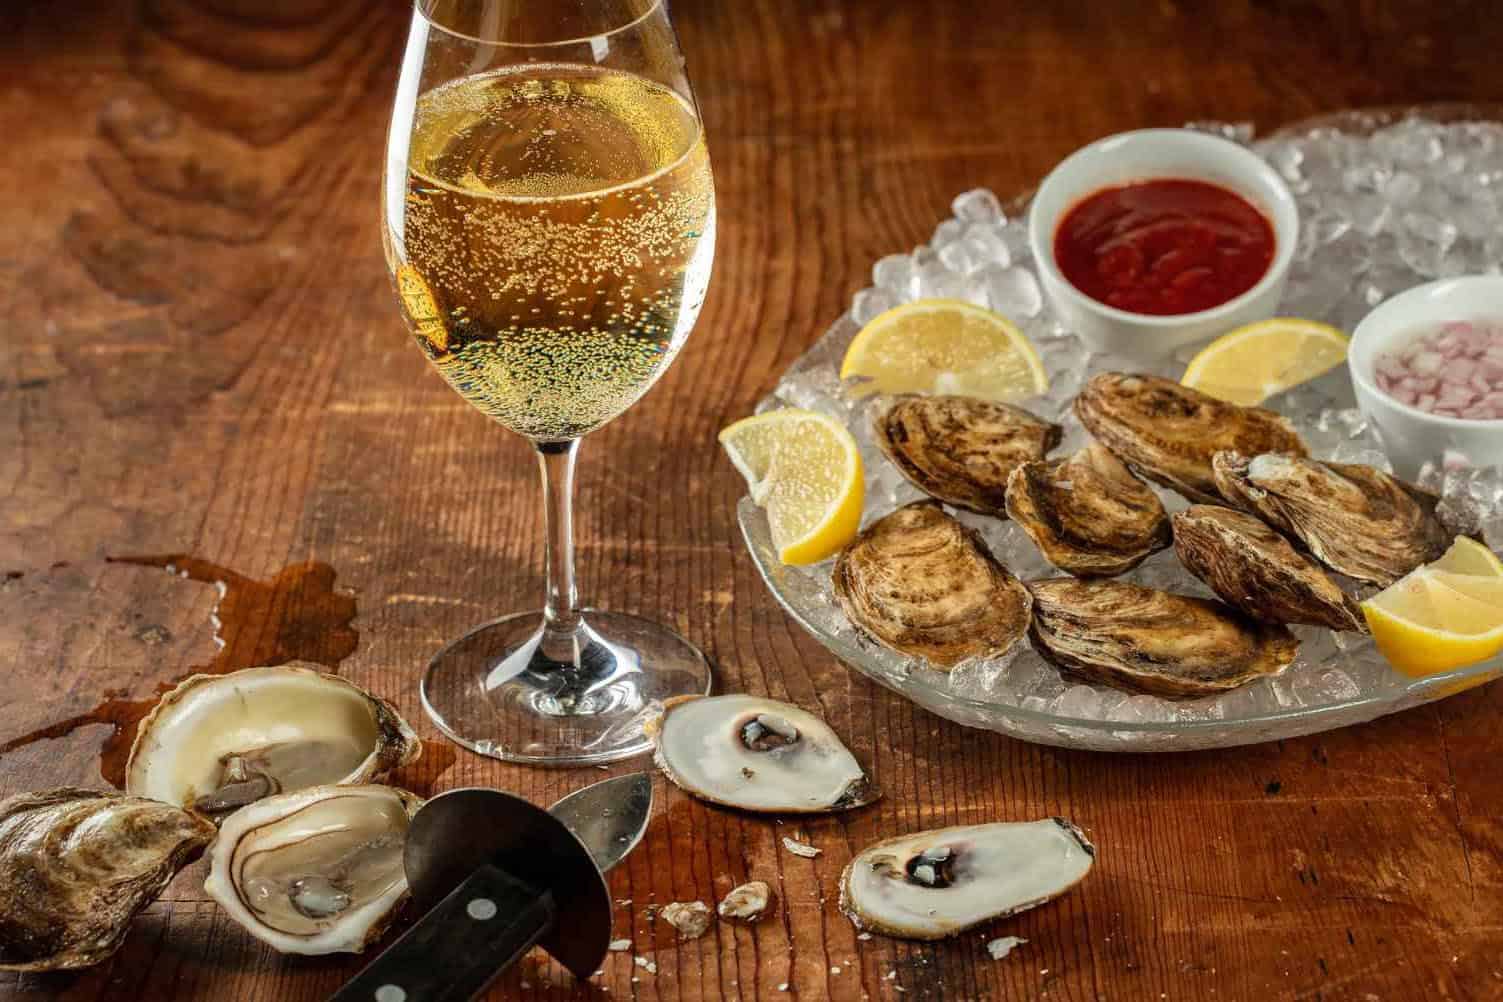 Sparkling-wine-or-dry-white-wine-and-oysters